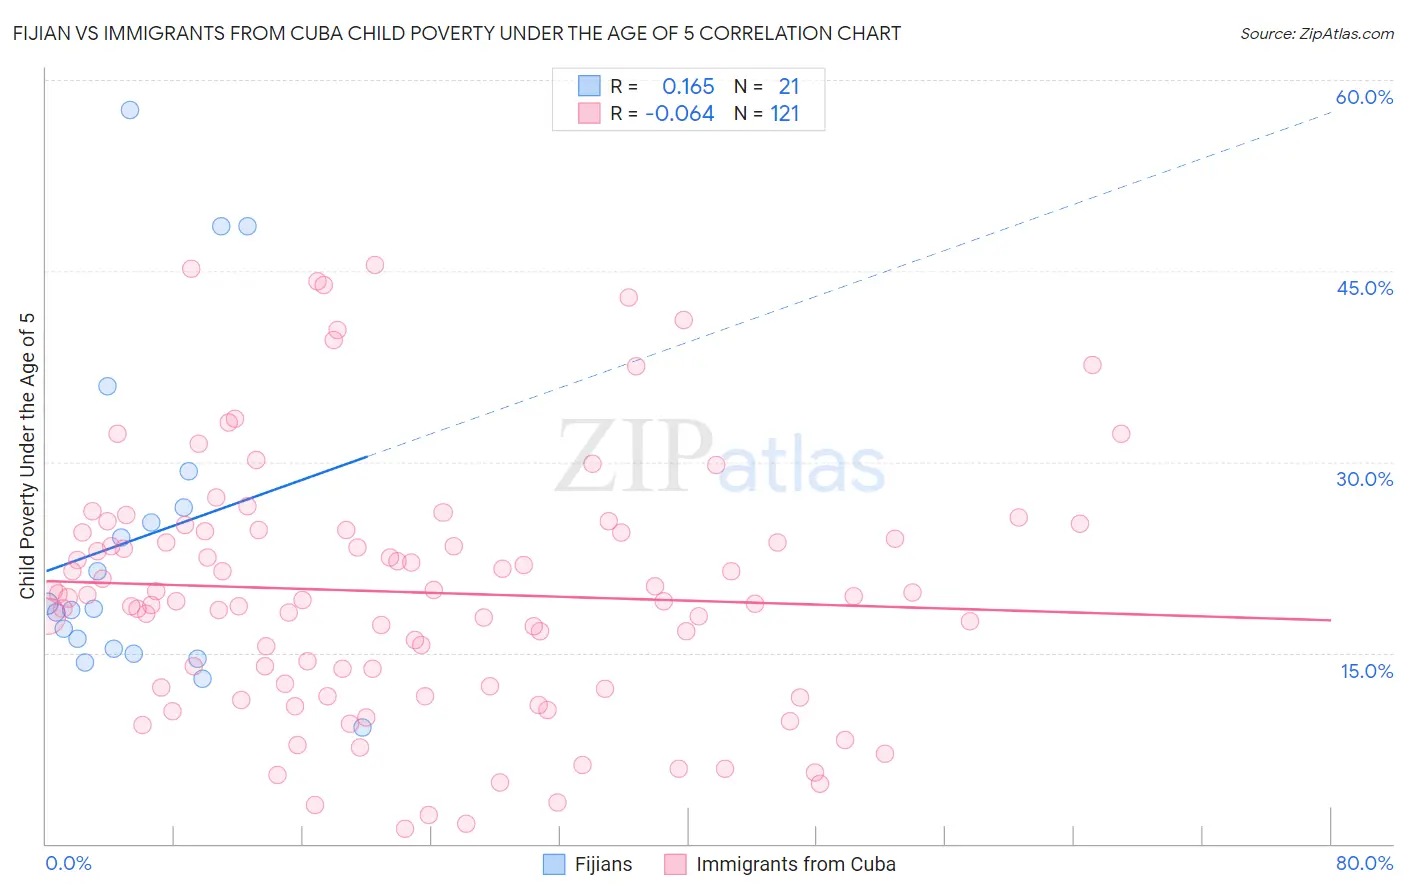 Fijian vs Immigrants from Cuba Child Poverty Under the Age of 5